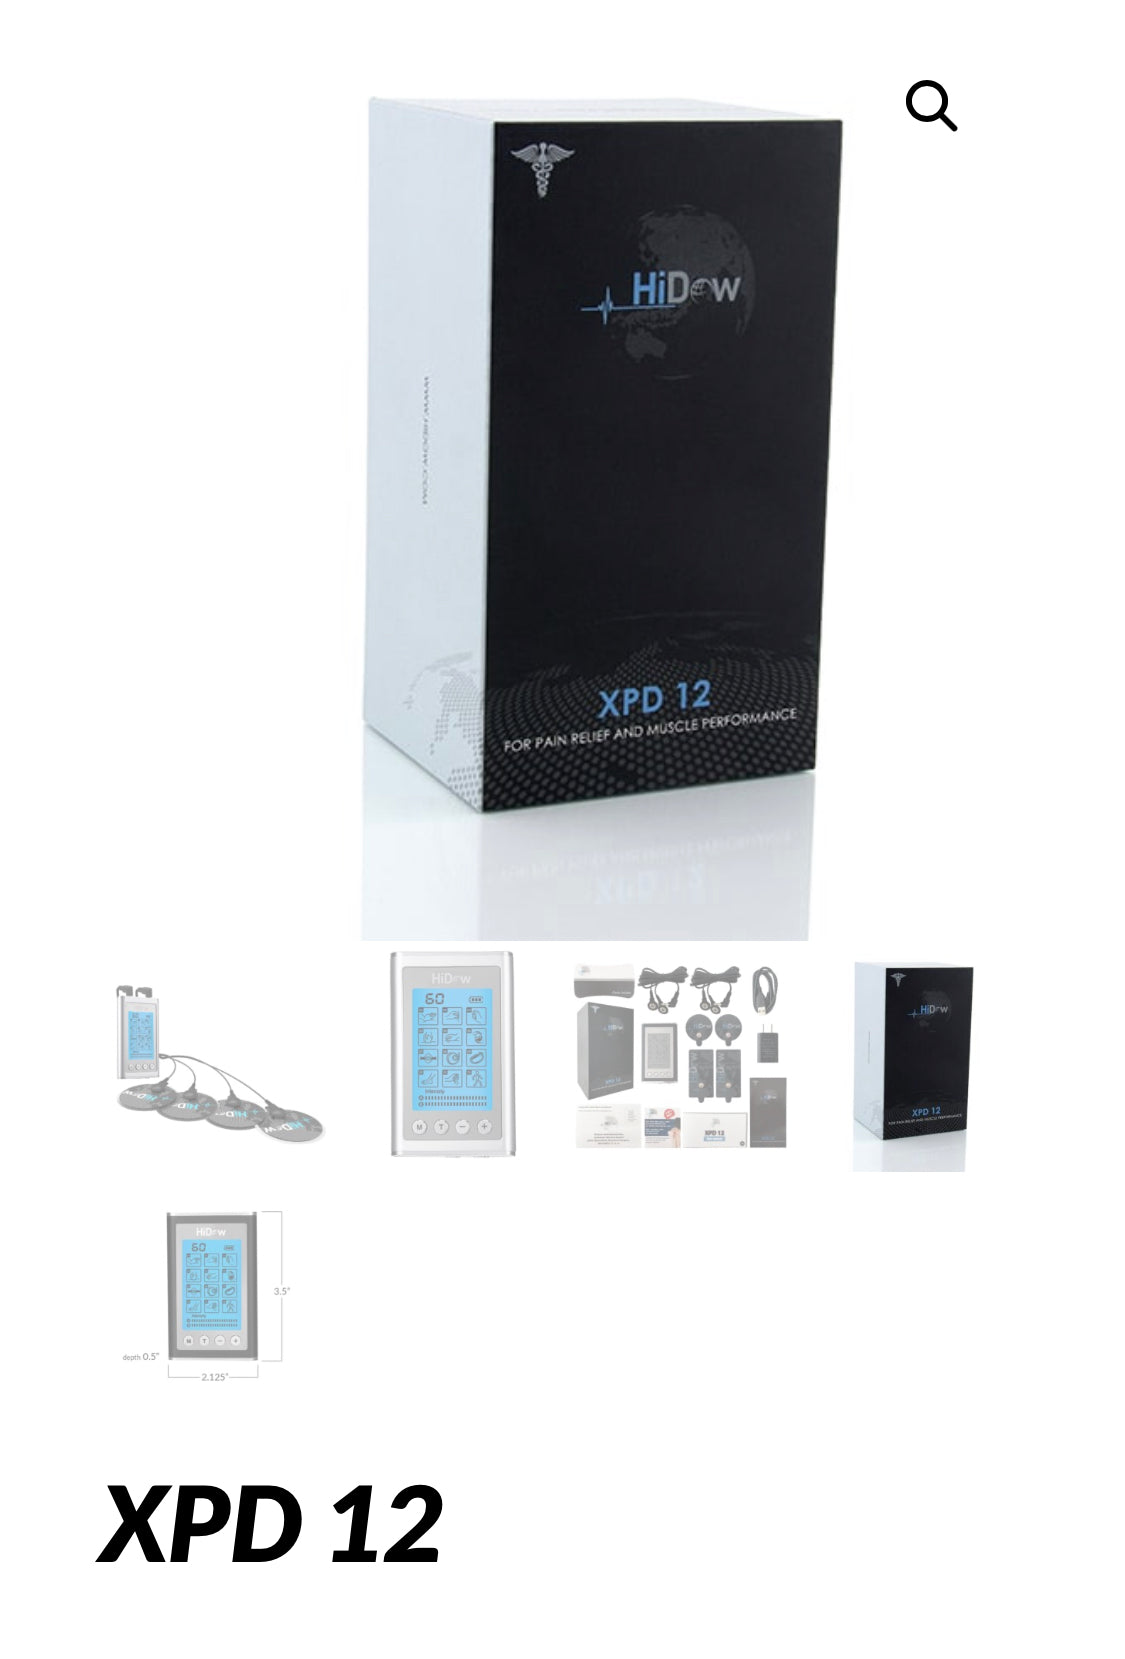  HiDow XPD Dual Channel TENS EMS Unit 12 Modes Muscle